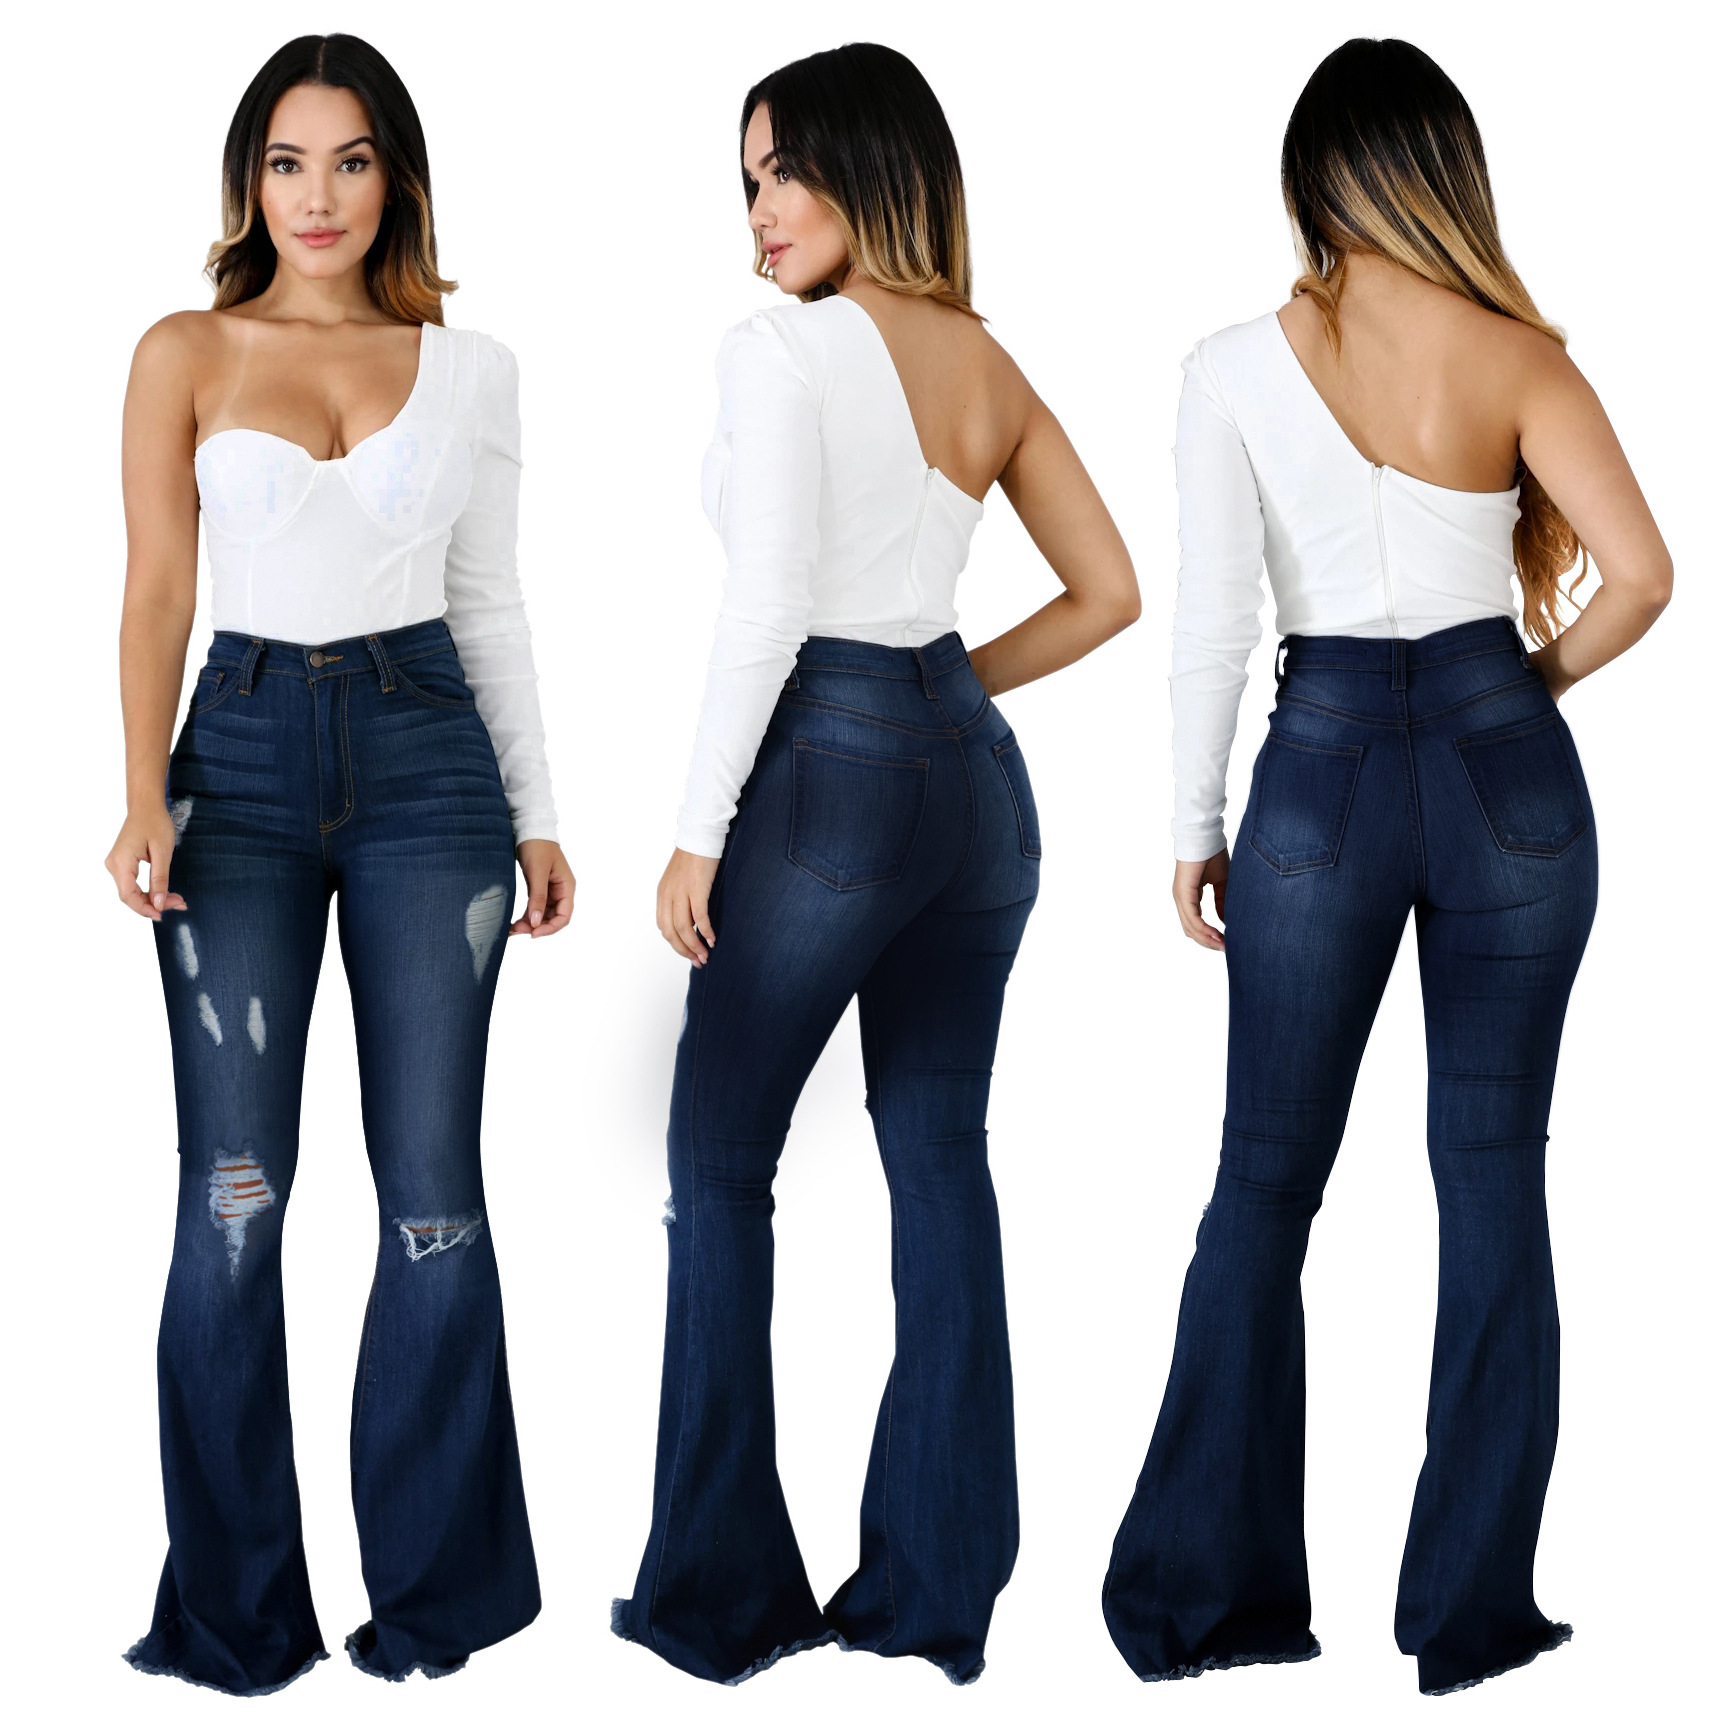 US$ 8.70 - Fashionable wide leg washed jeans with holes - www.keke ...